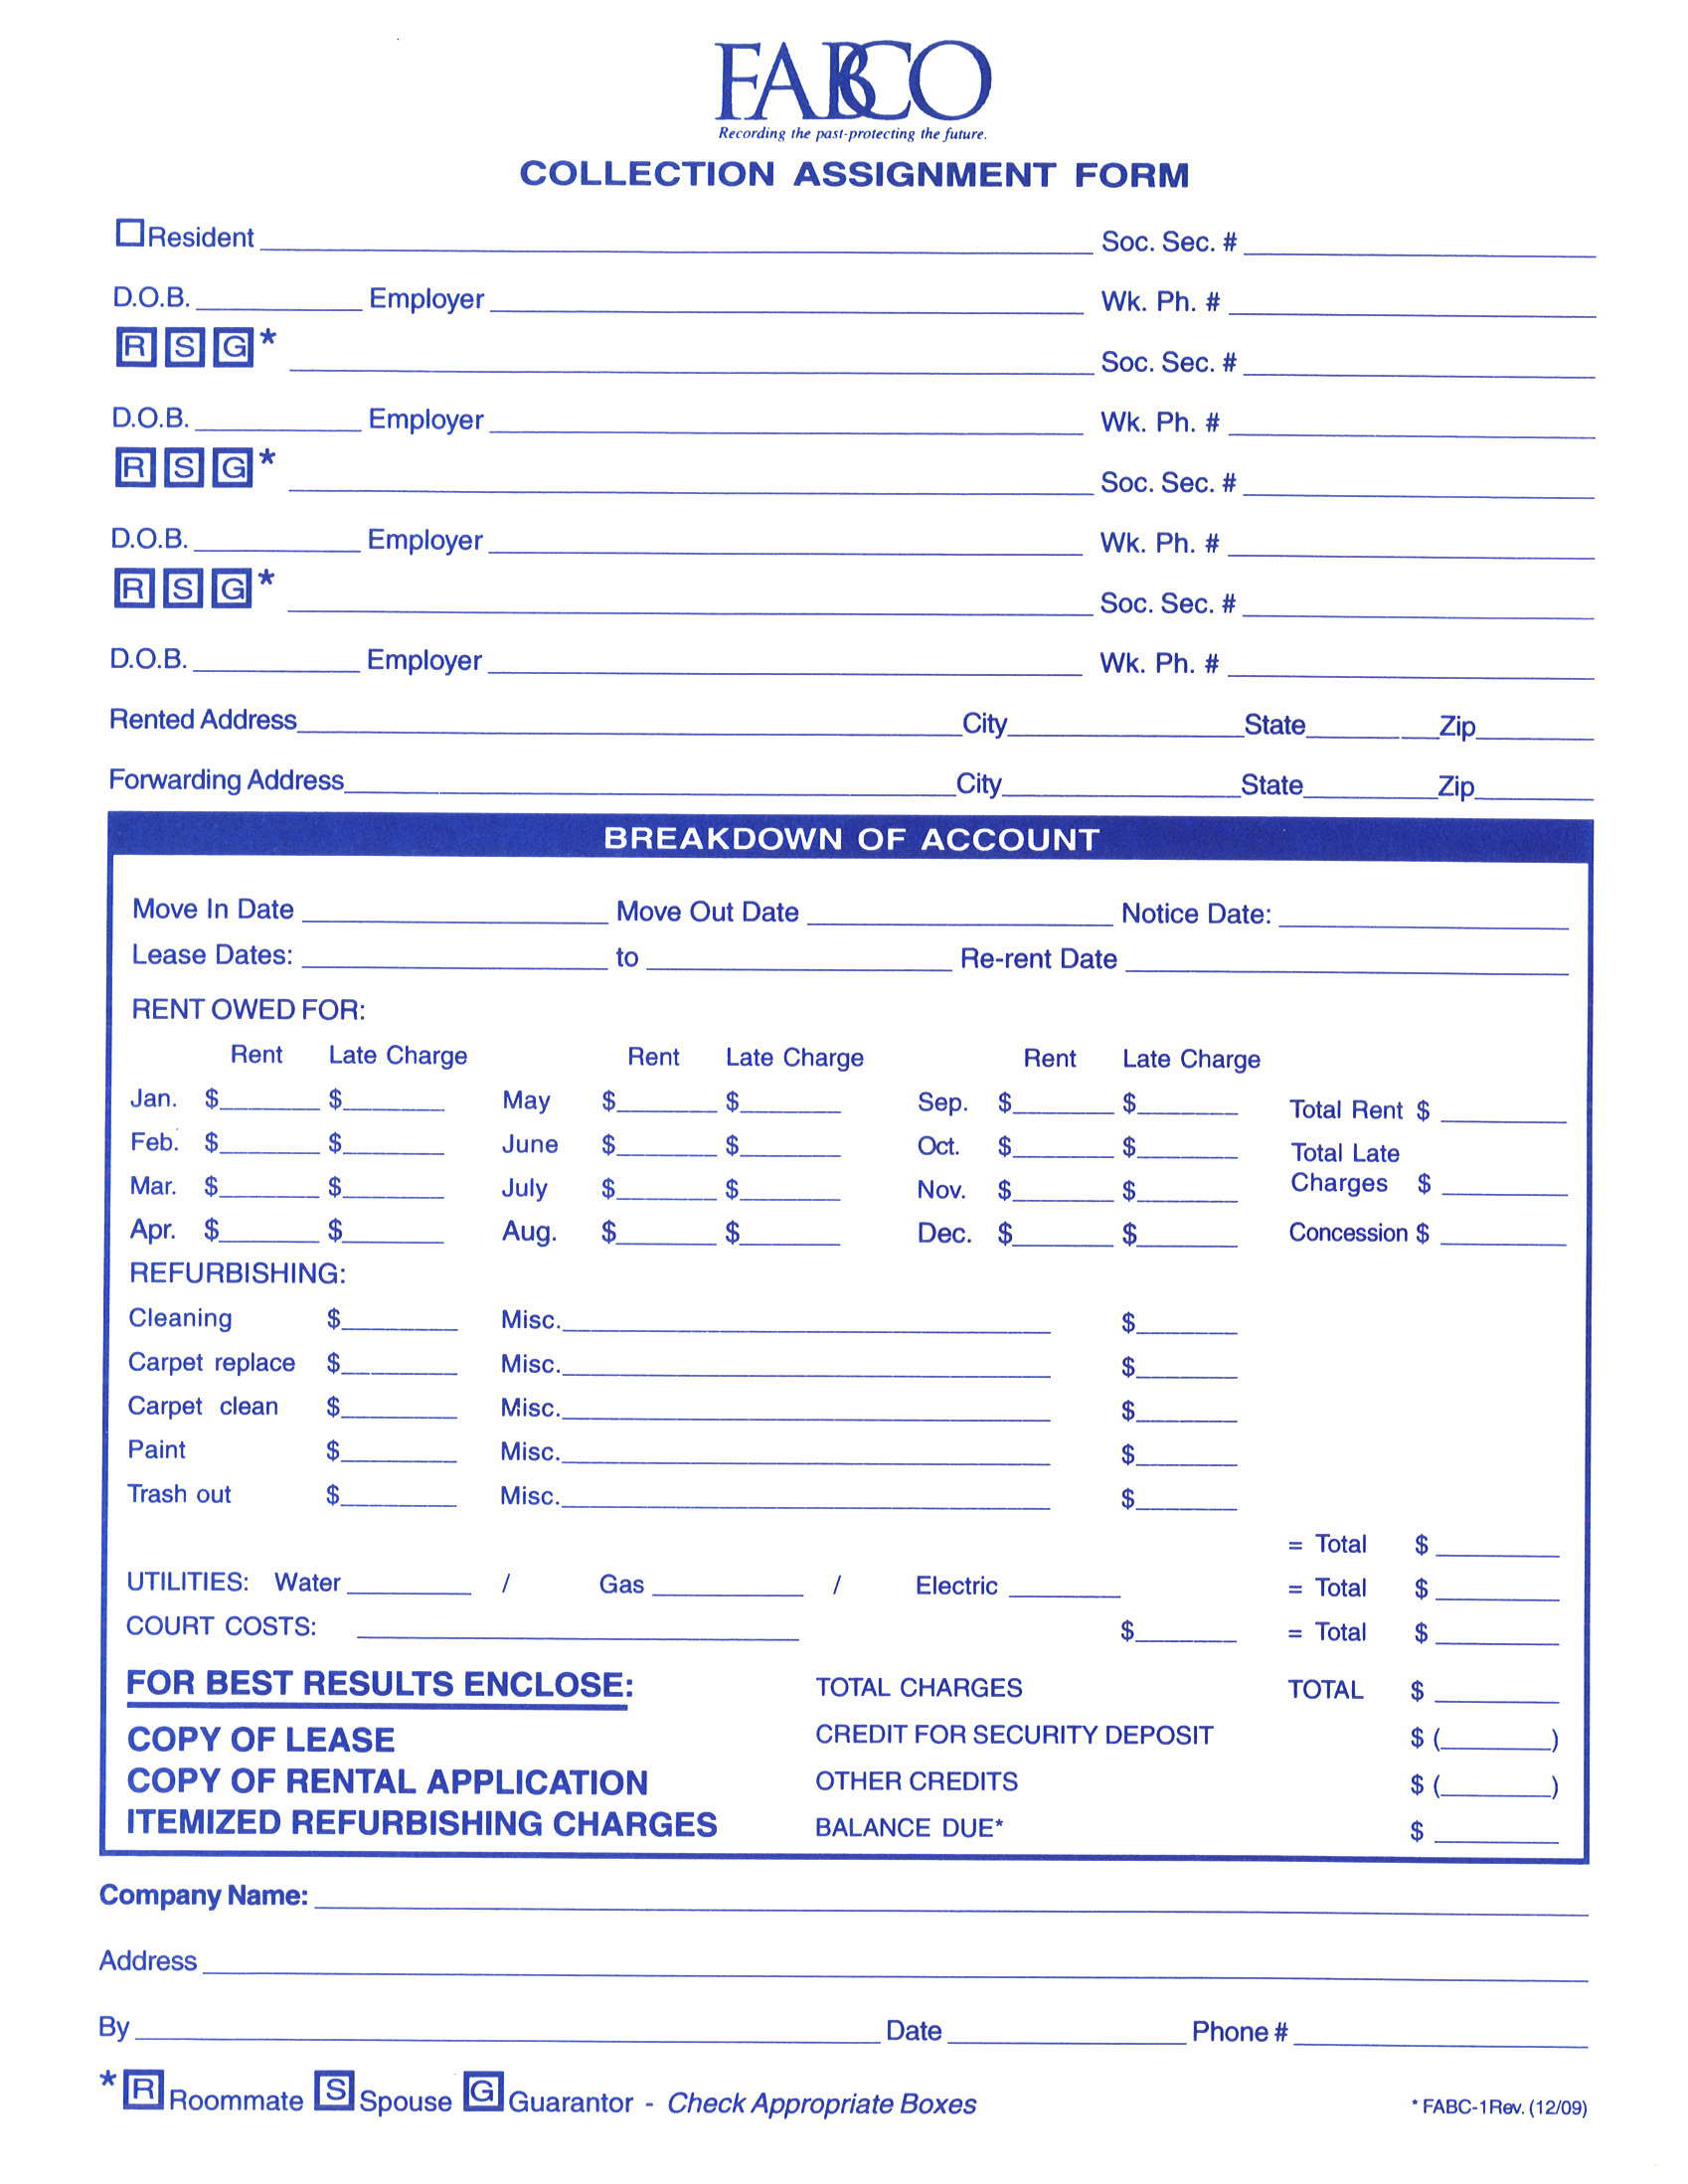 Collection Assignment Form